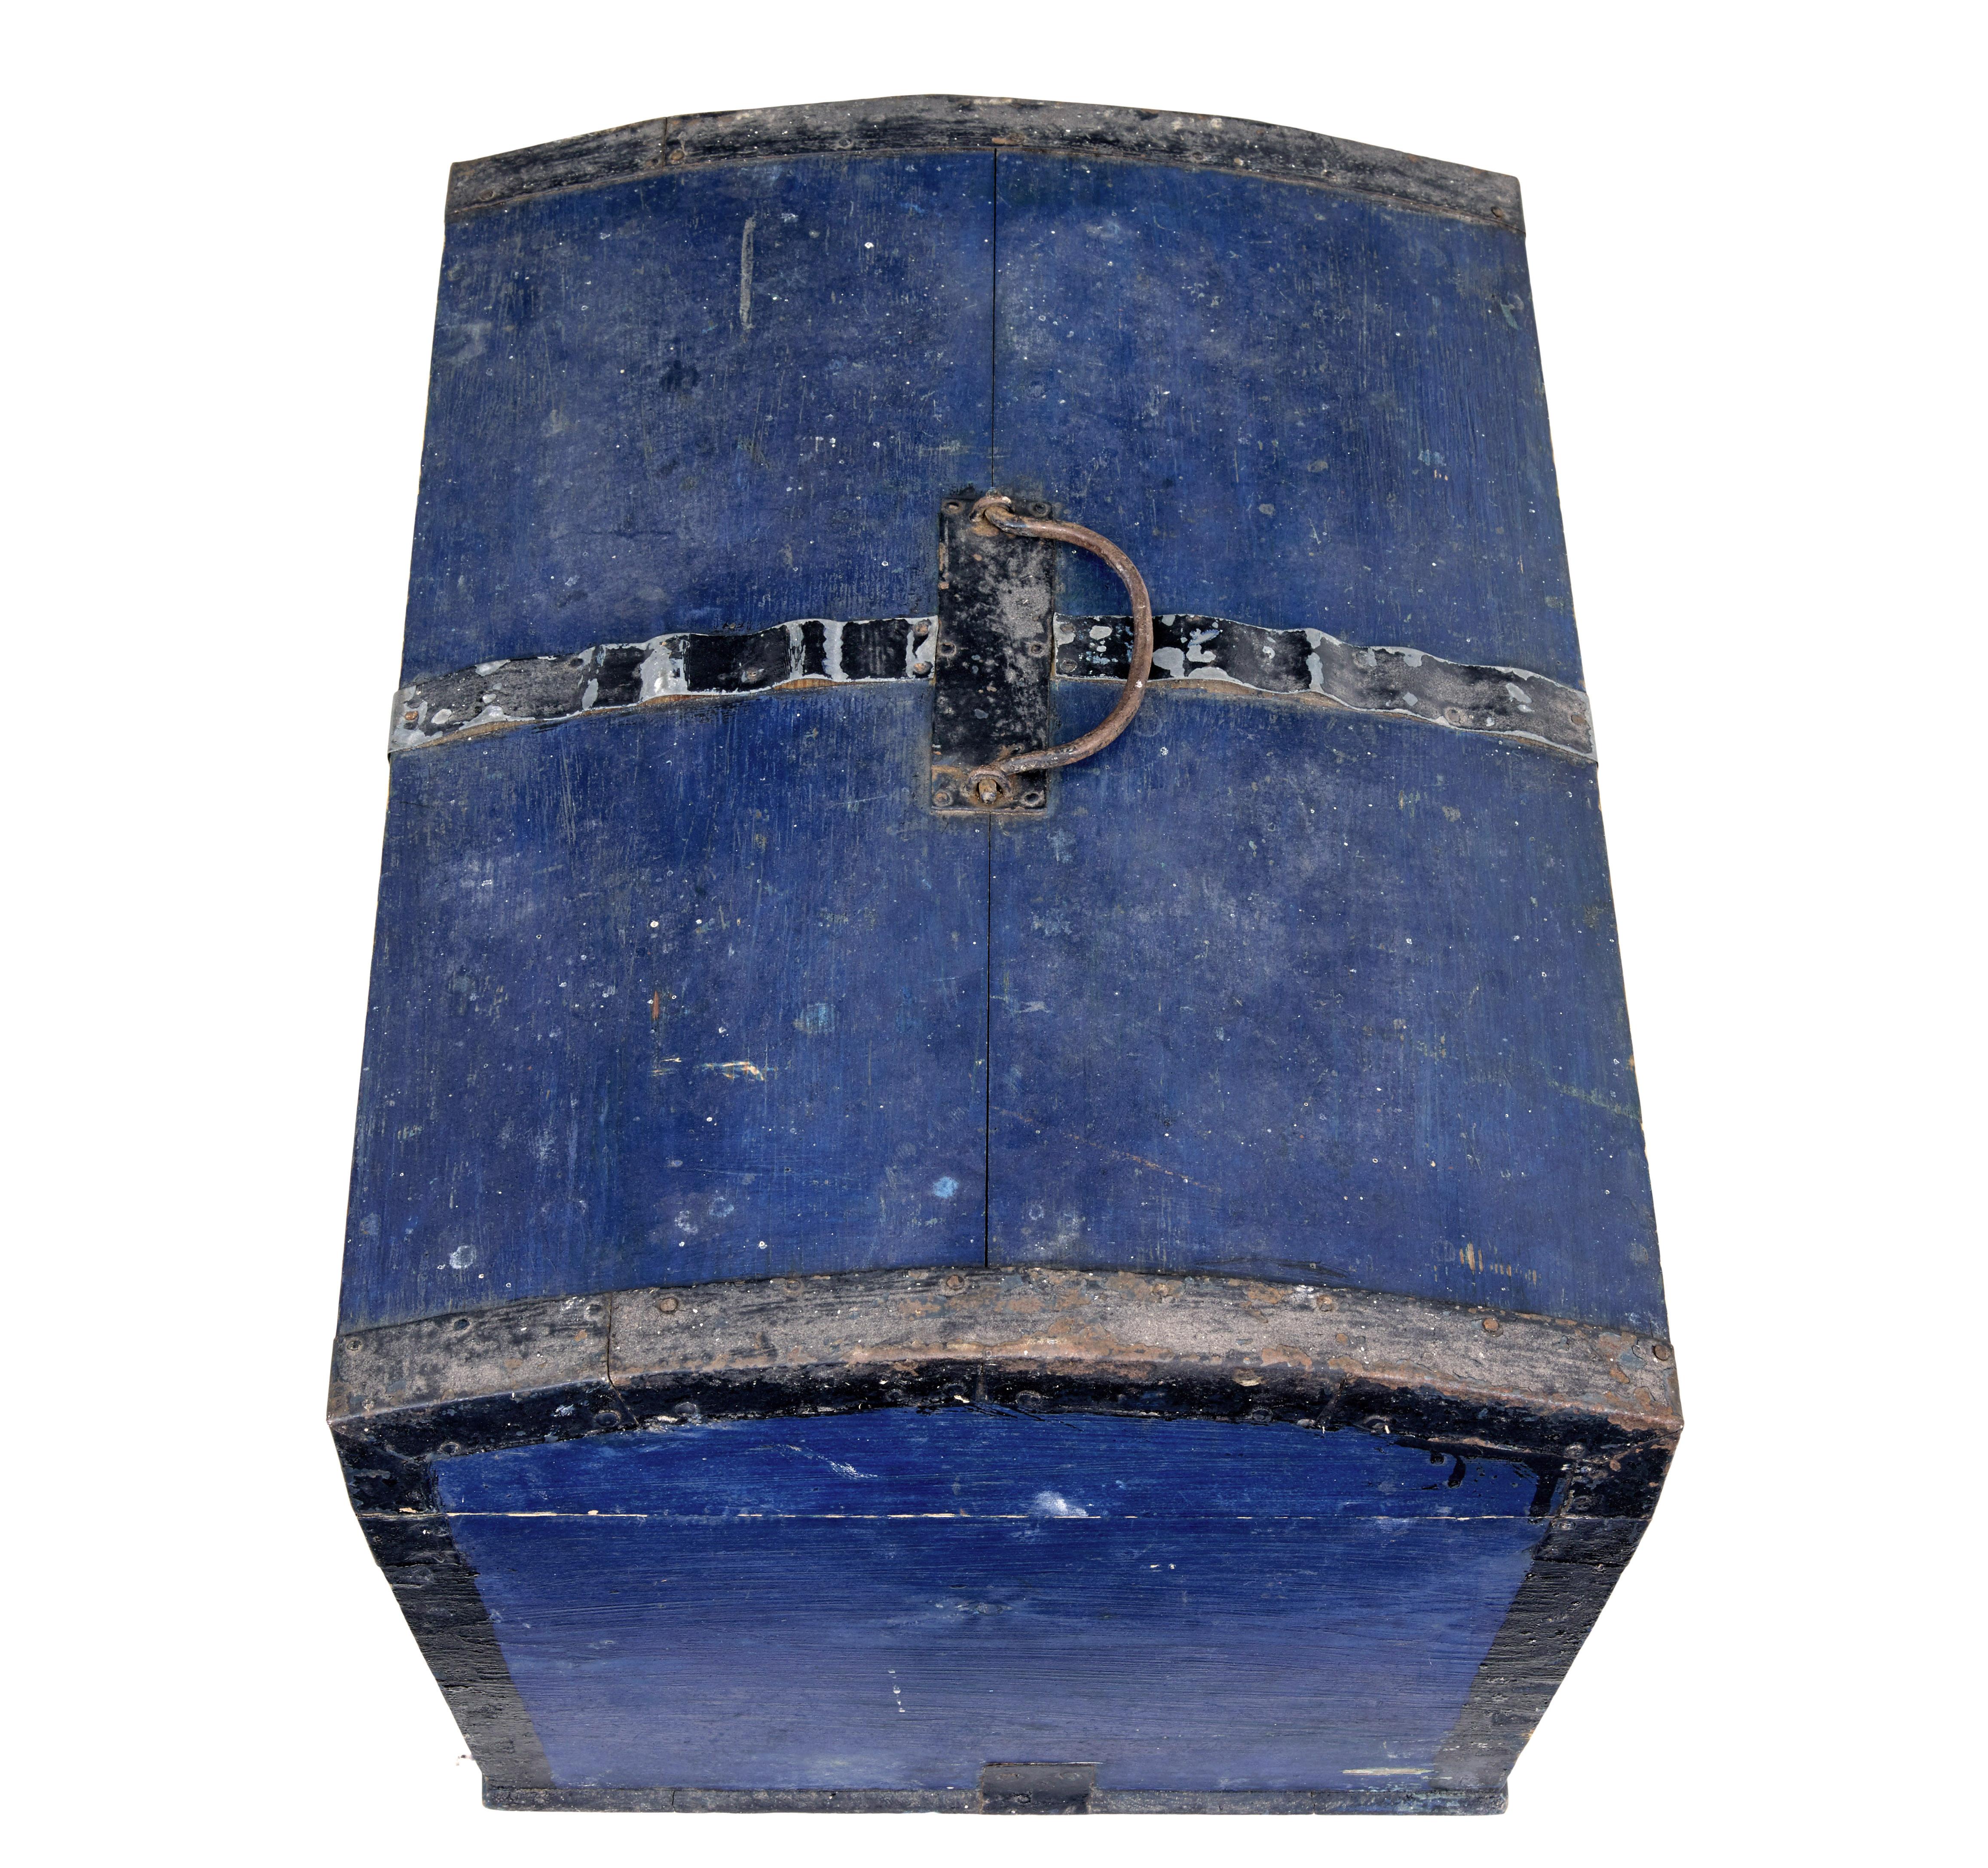 19th century Small Swedish dome top box, circa 1860.

Good quality dome top box with shaped sides. In original deep blue paint with black painted metalwork. Lid opens to reveal a clean bare pine space for storage. No lock present.

Expected